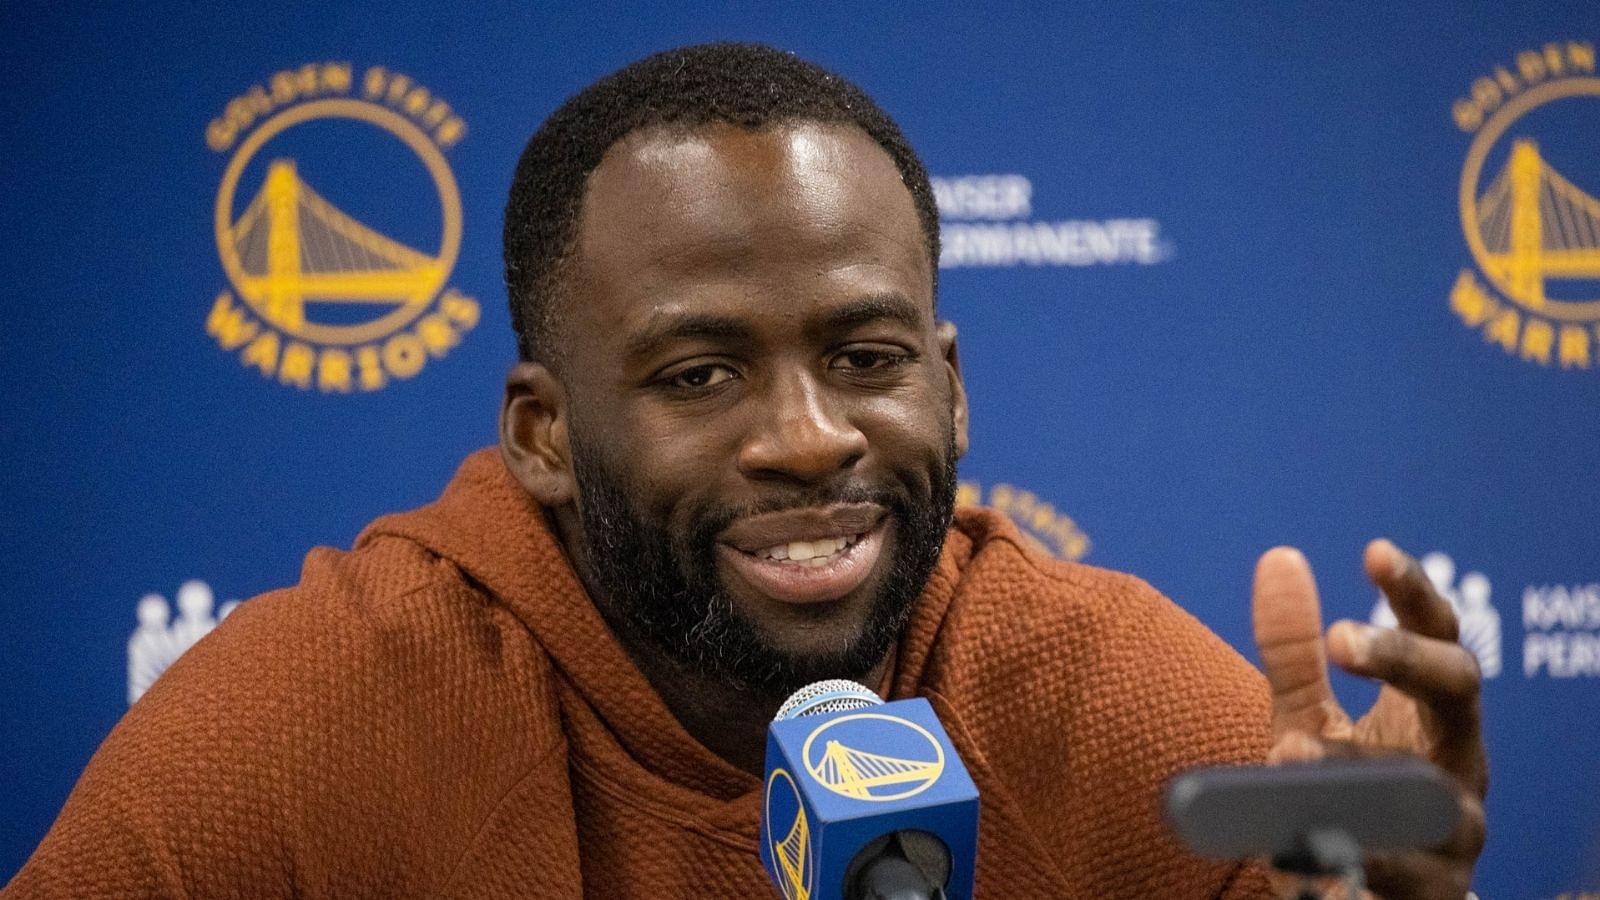 Draymond Green believes this $14M player could make an ideal candidate for The New Media Movement